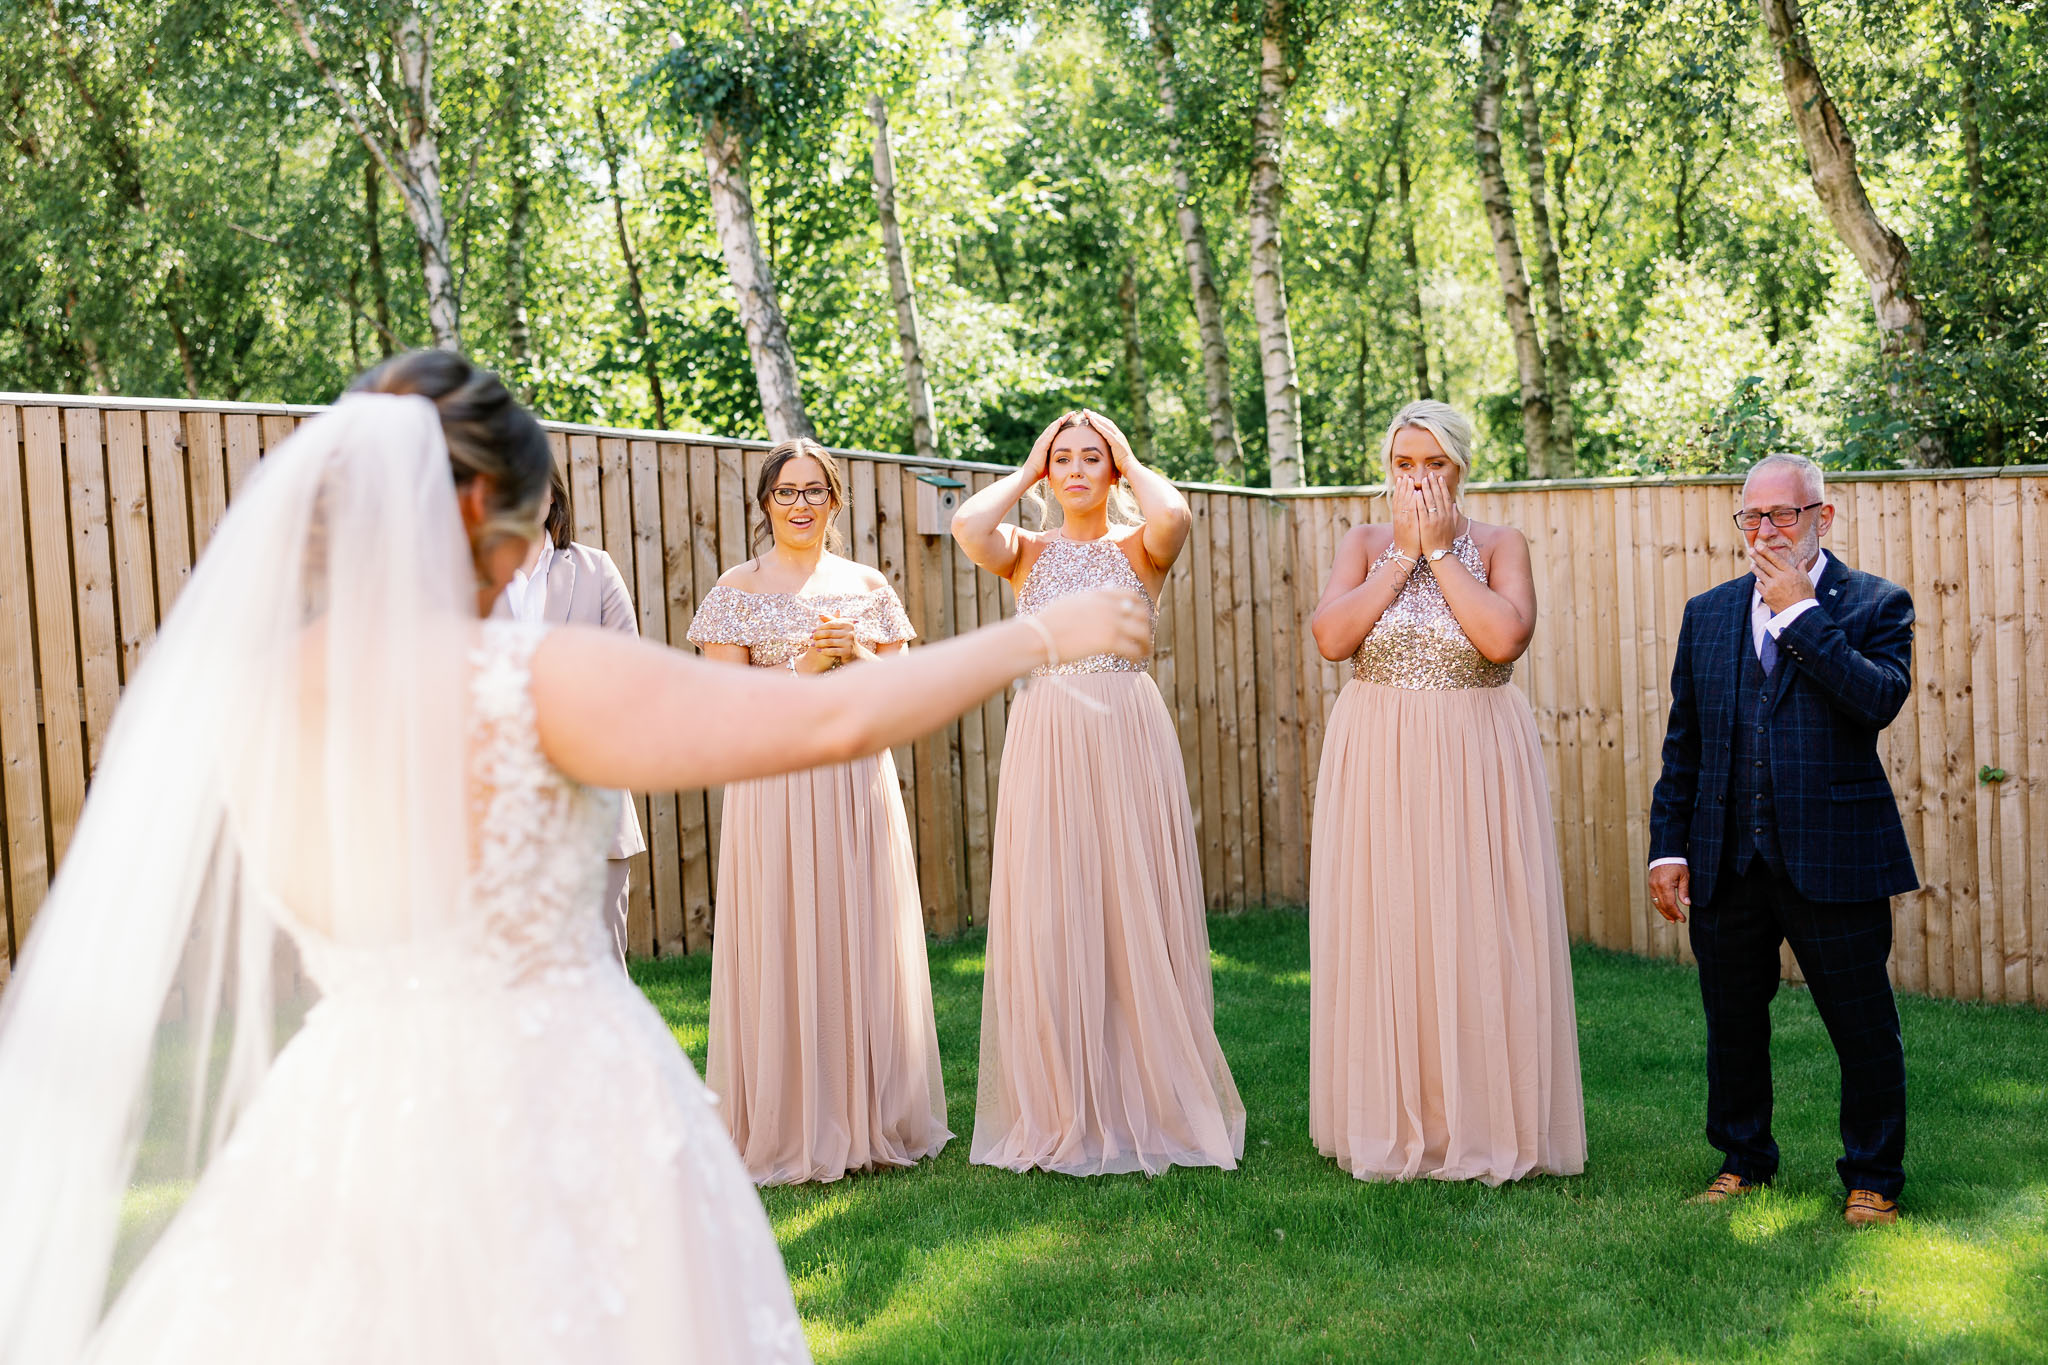 Bridesmaids in blush see bride for first time and cry